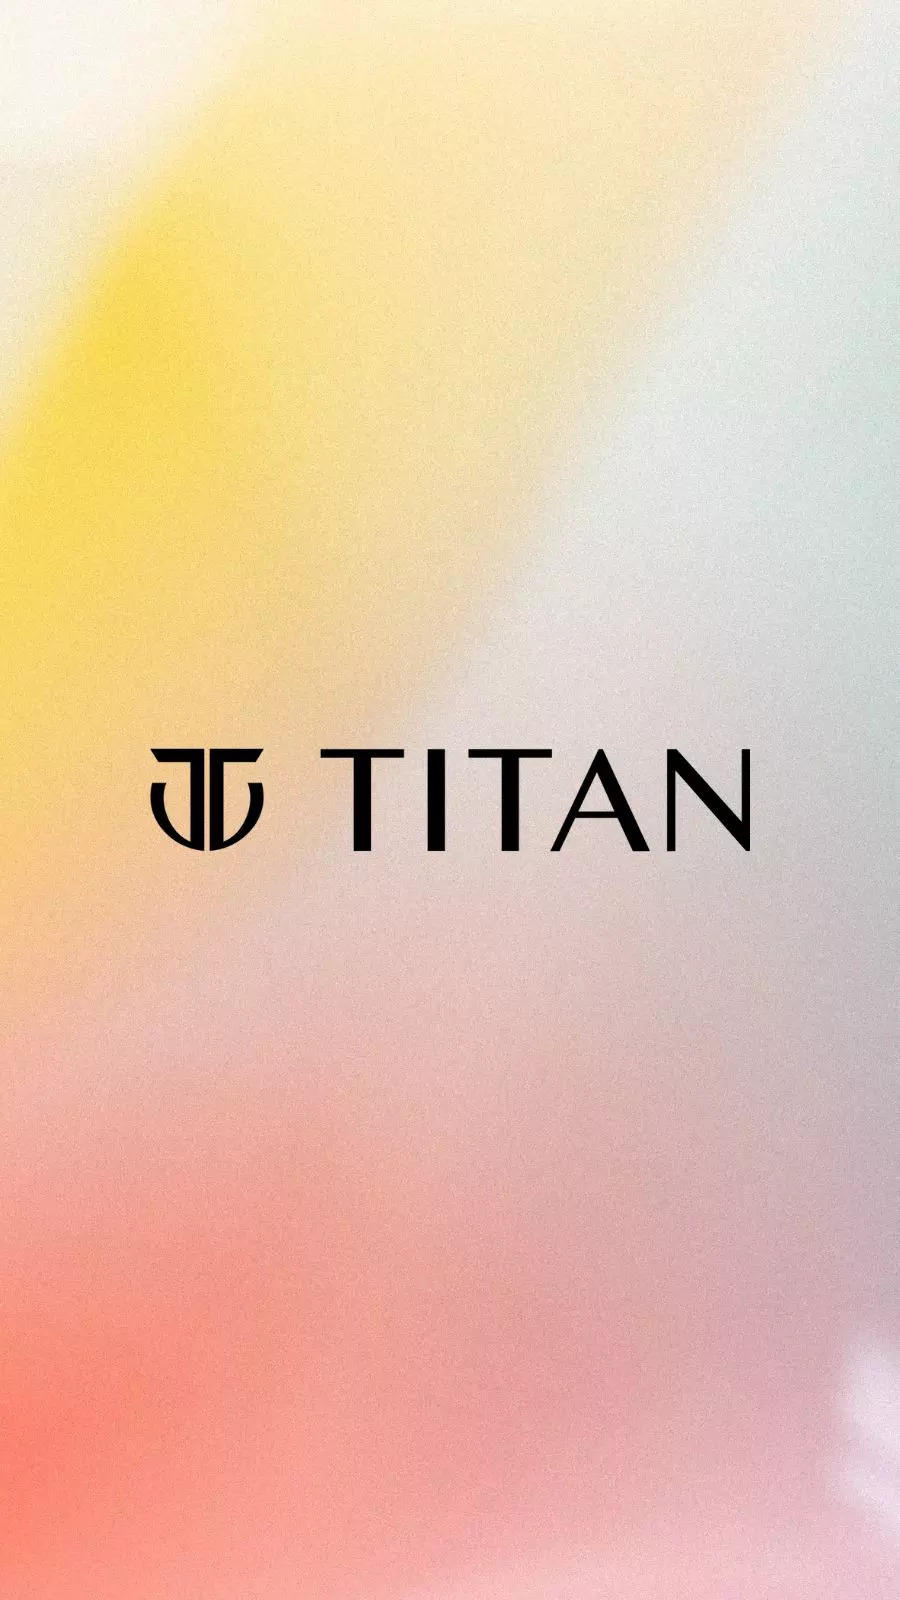 Titan Q3 impact: Should you buy, sell or hold the stock?